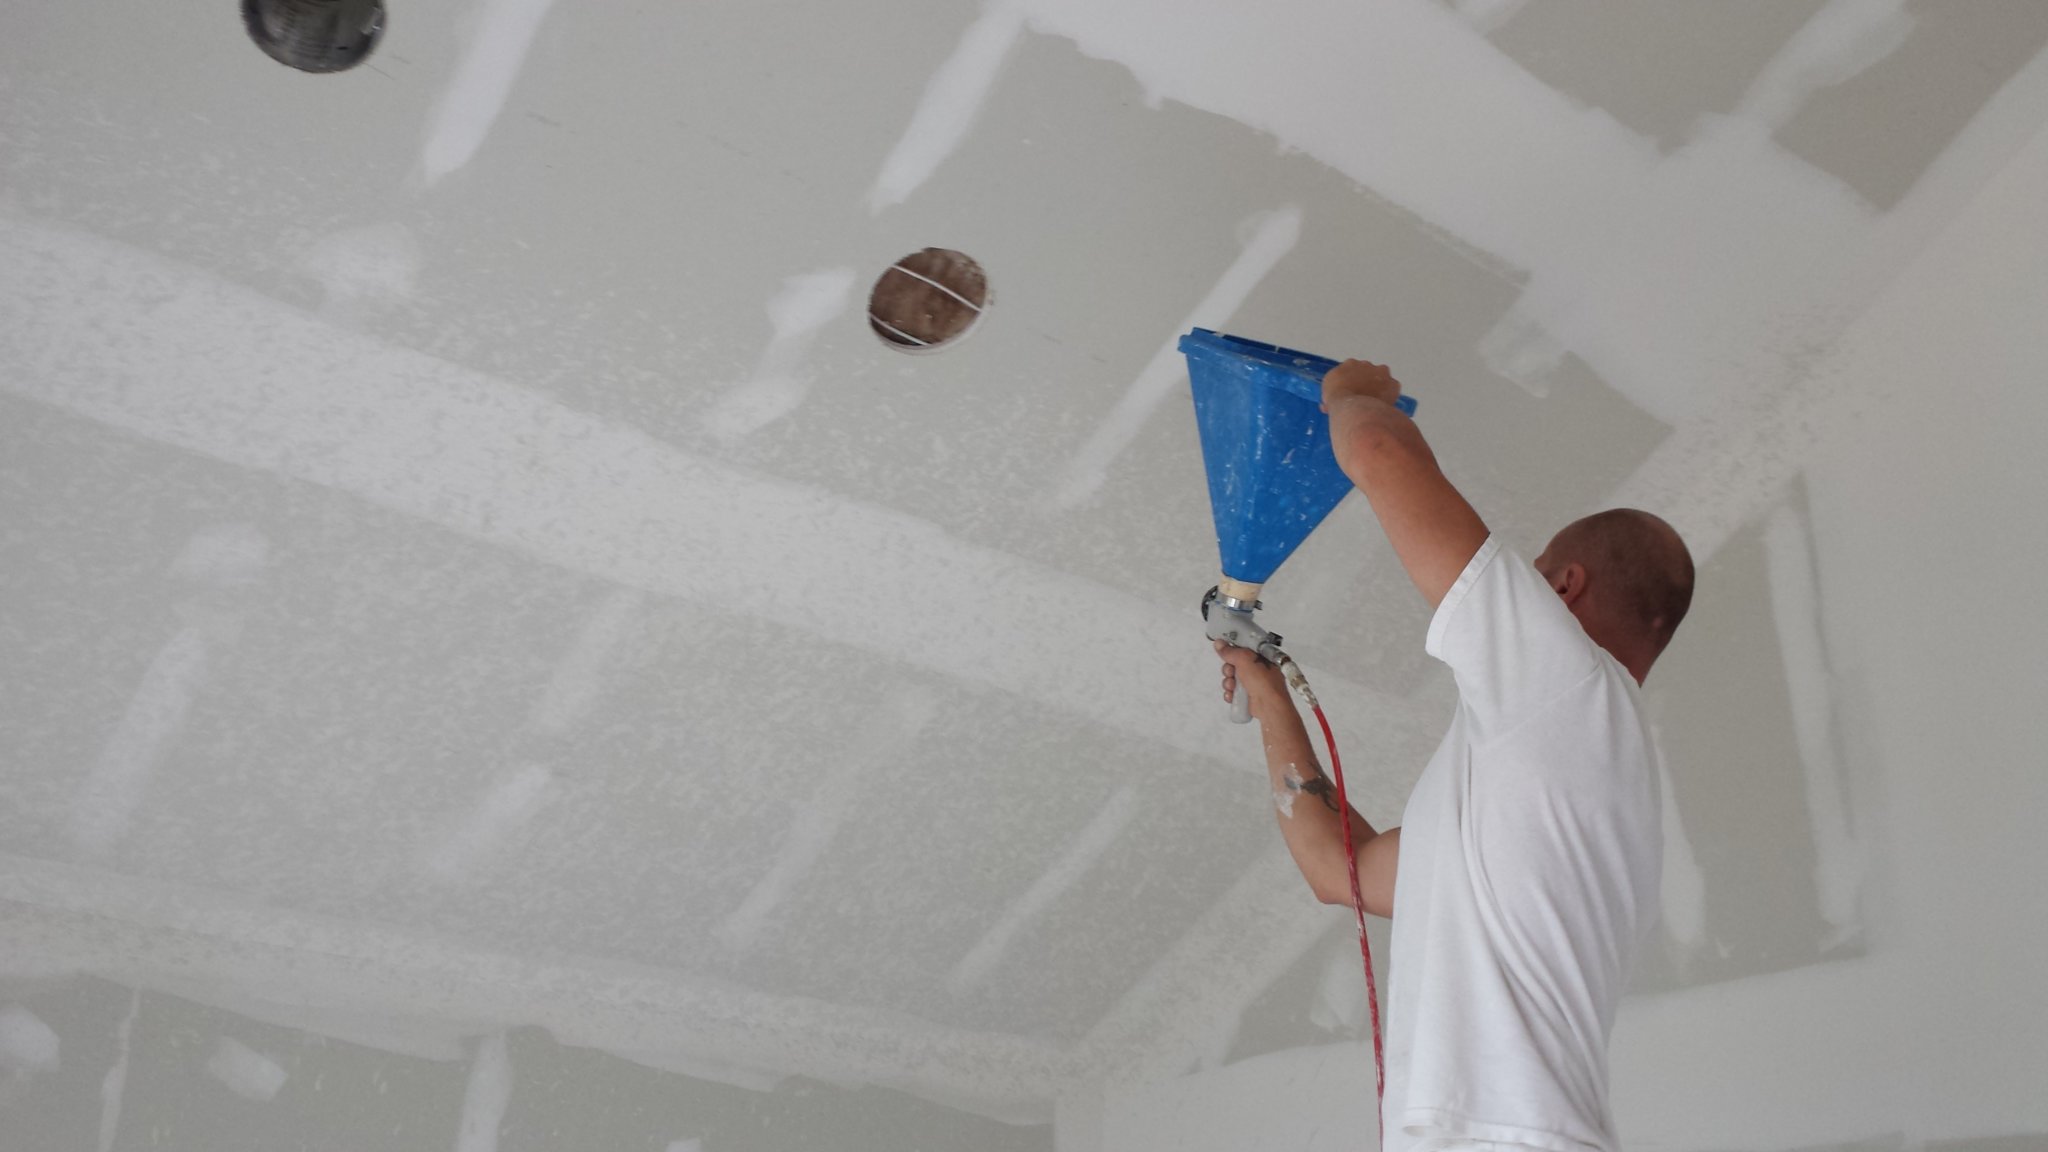 Drywall Texturing Services Mn Minneapolis Sheetrock Contractor